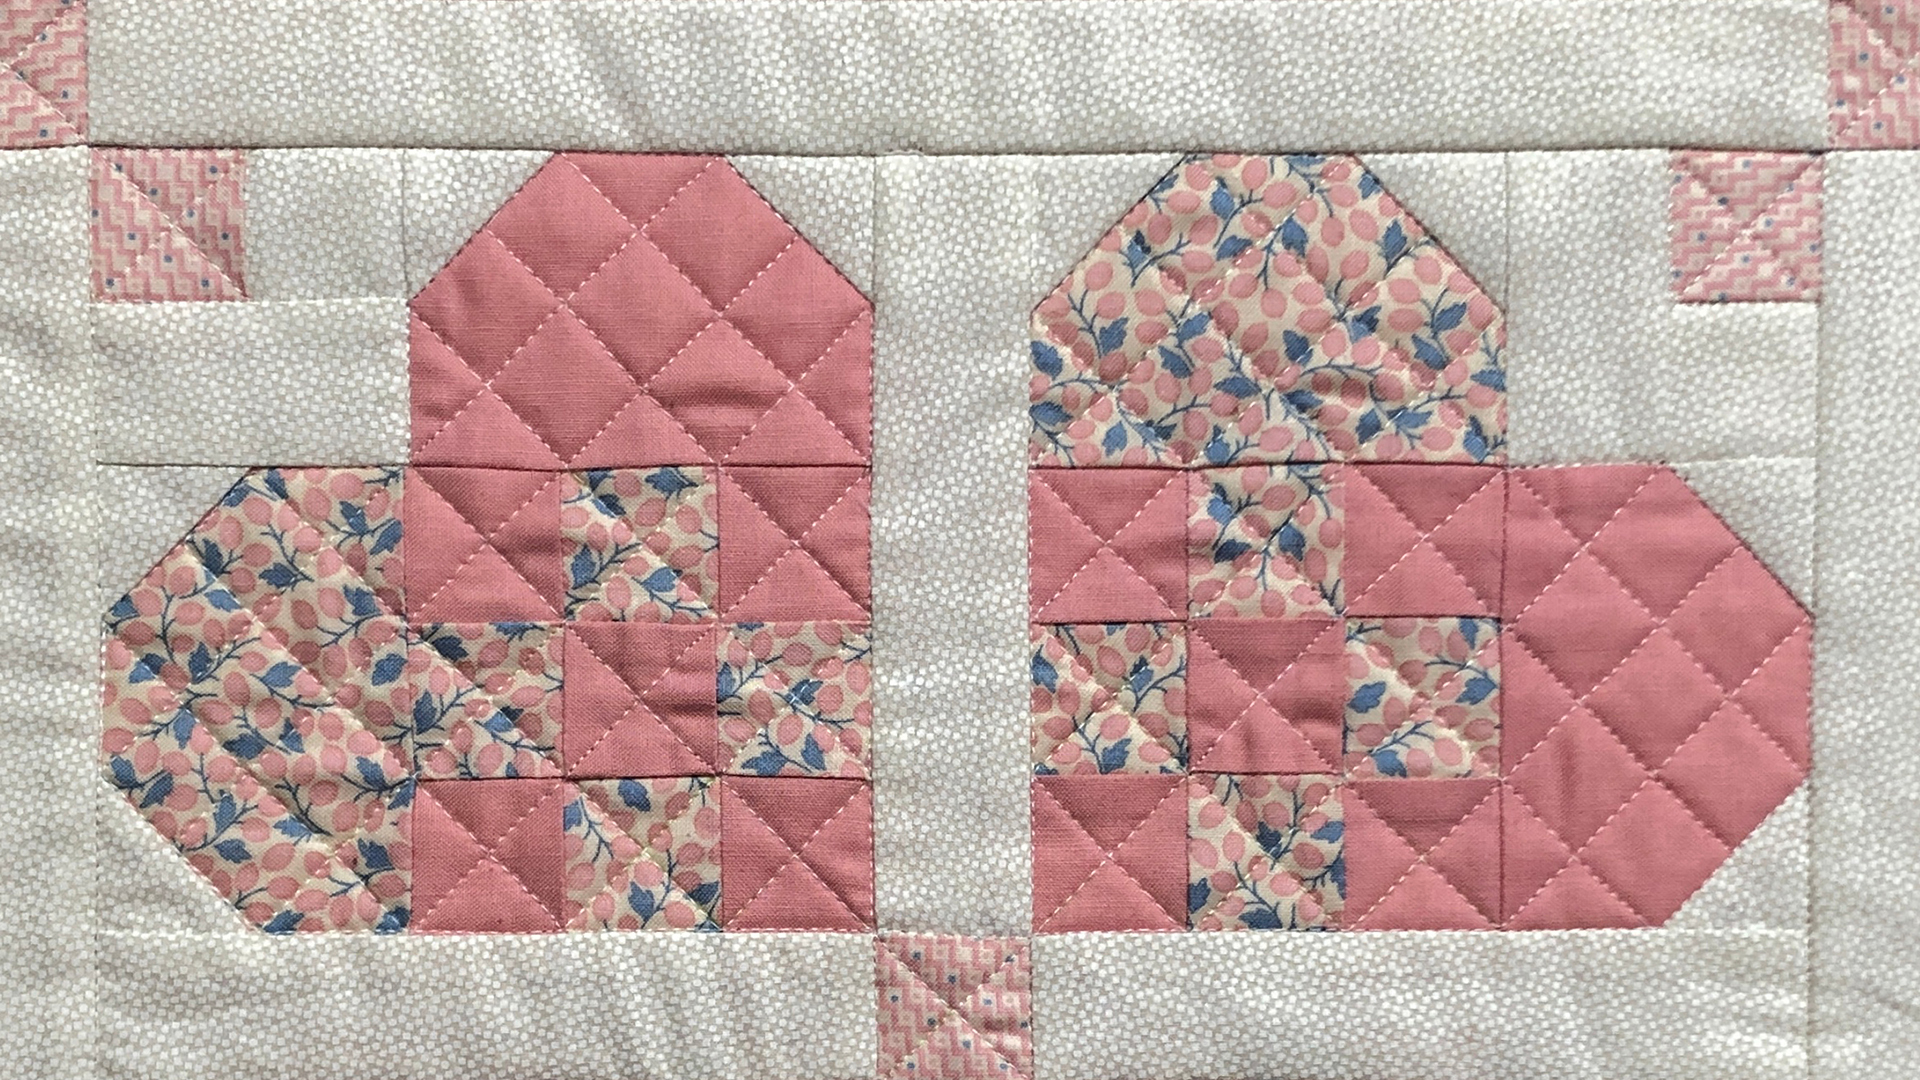 Free Quilt Pattern - My Woven Heart Mini Wall Hanging